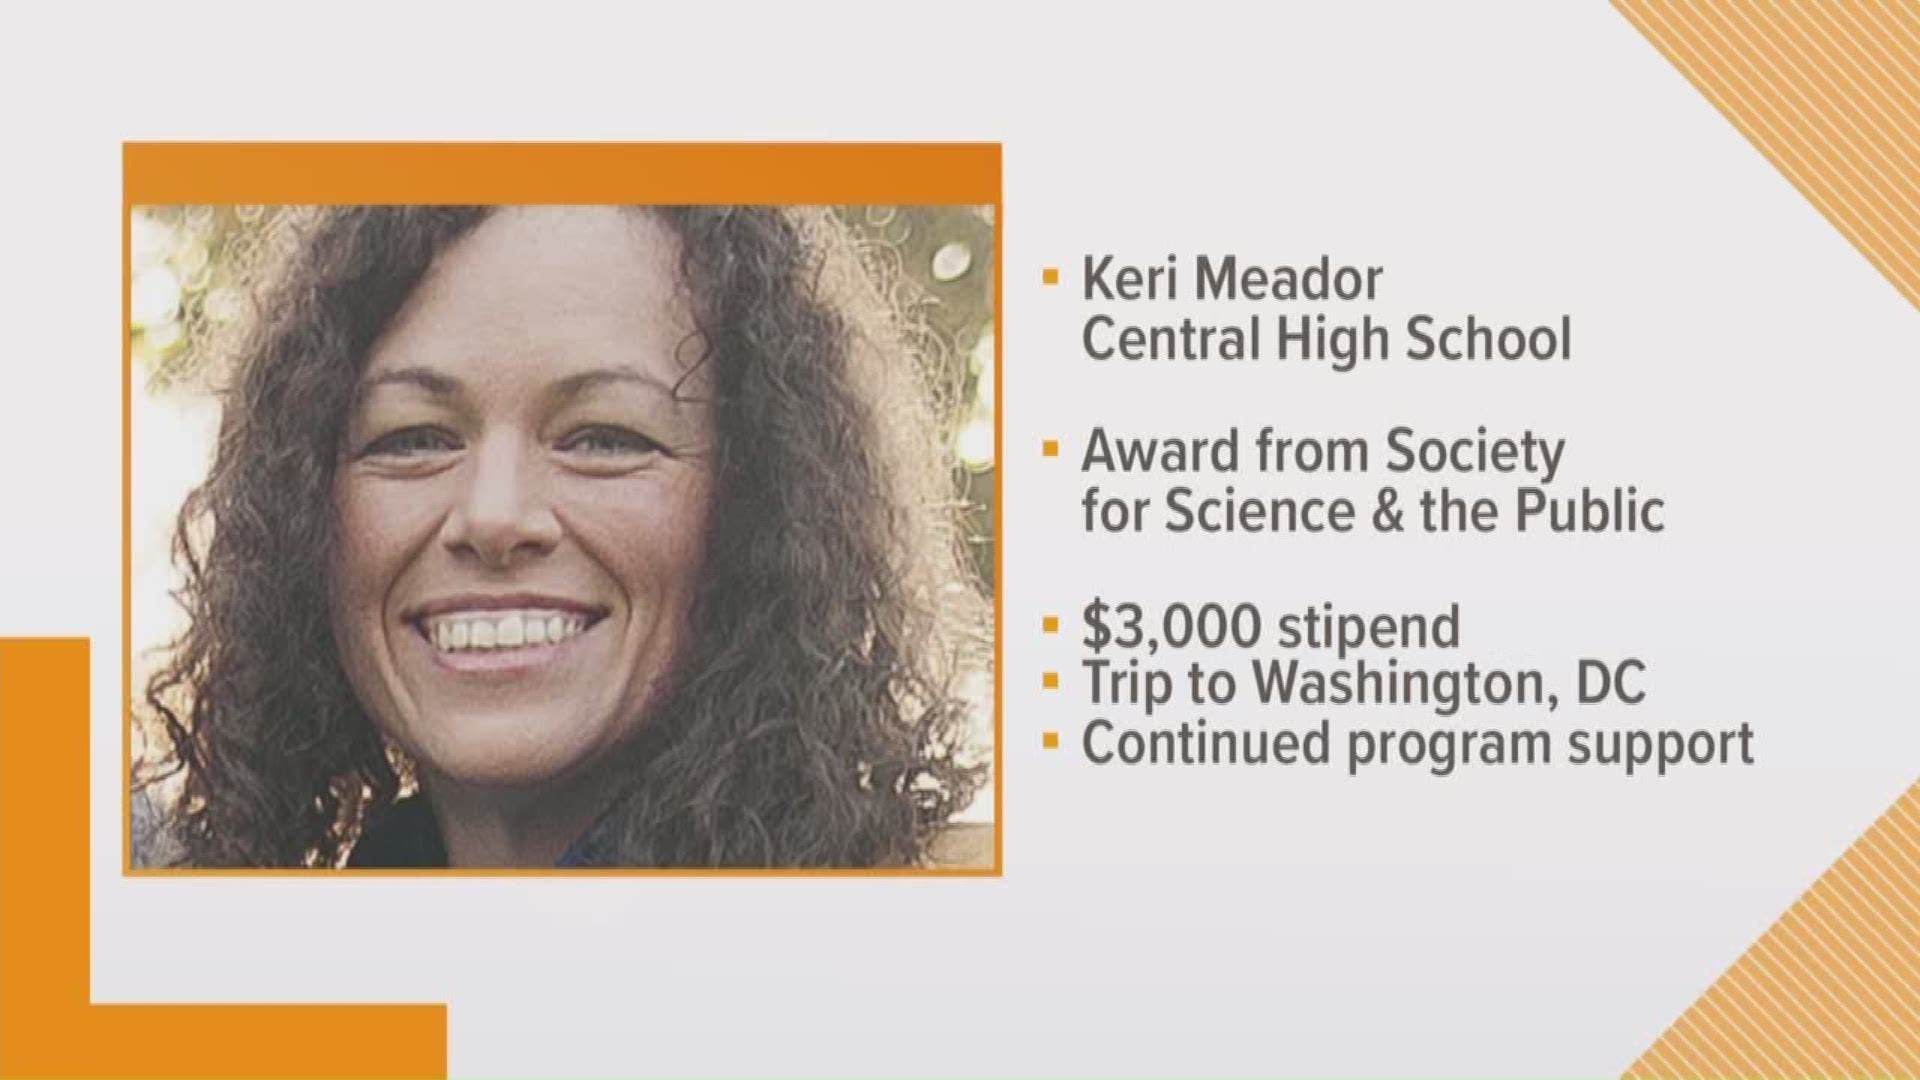 Keri Meador from Central High School is among 60 advocates from across the country to receive an award from The Society for Science and the Public.